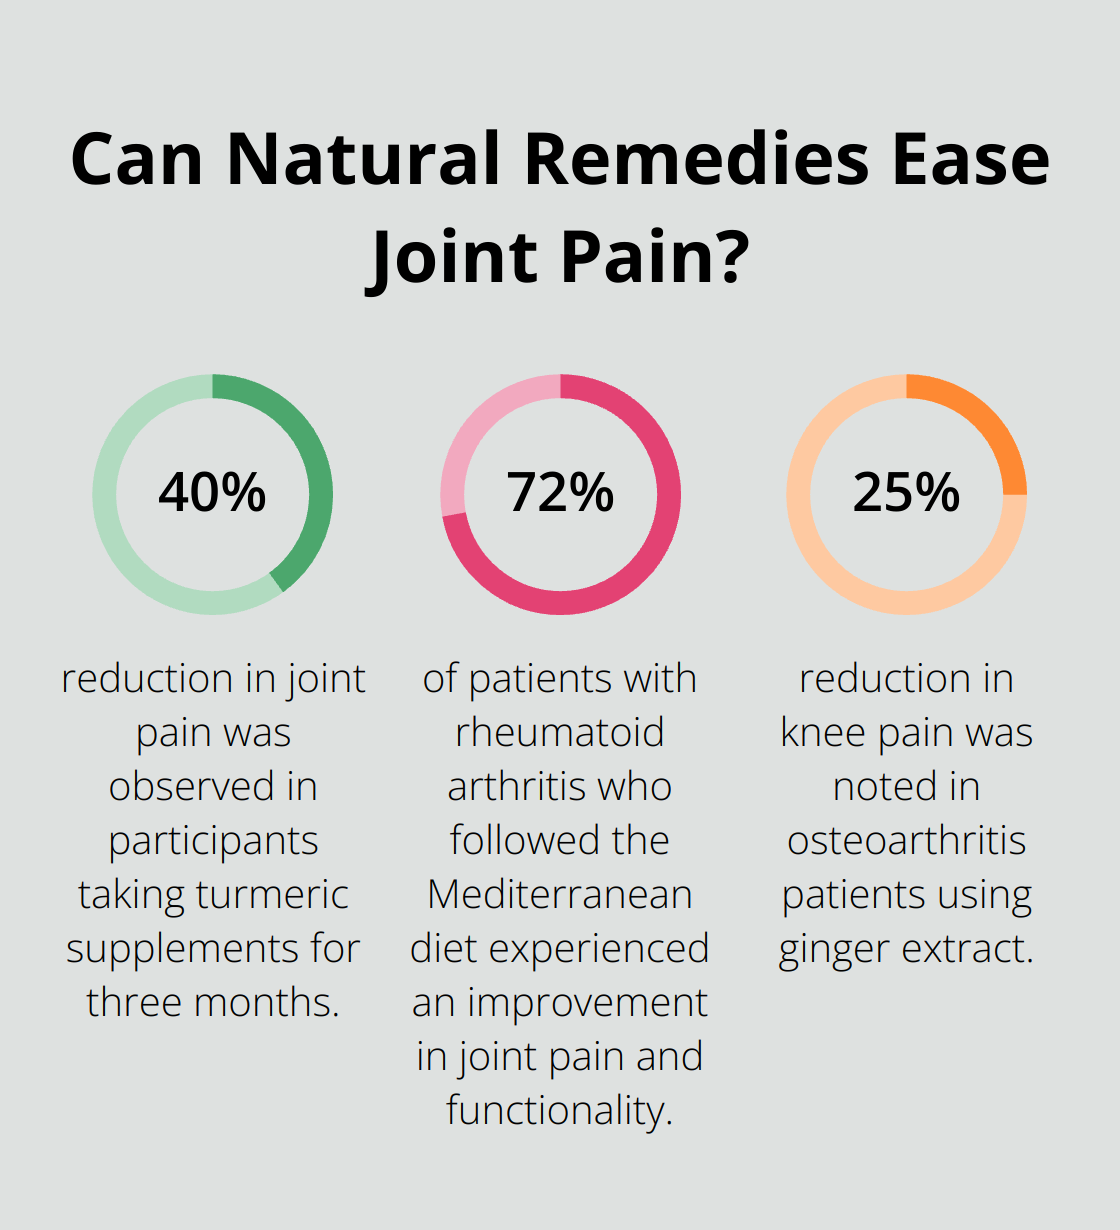 Fact - Can Natural Remedies Ease Joint Pain?